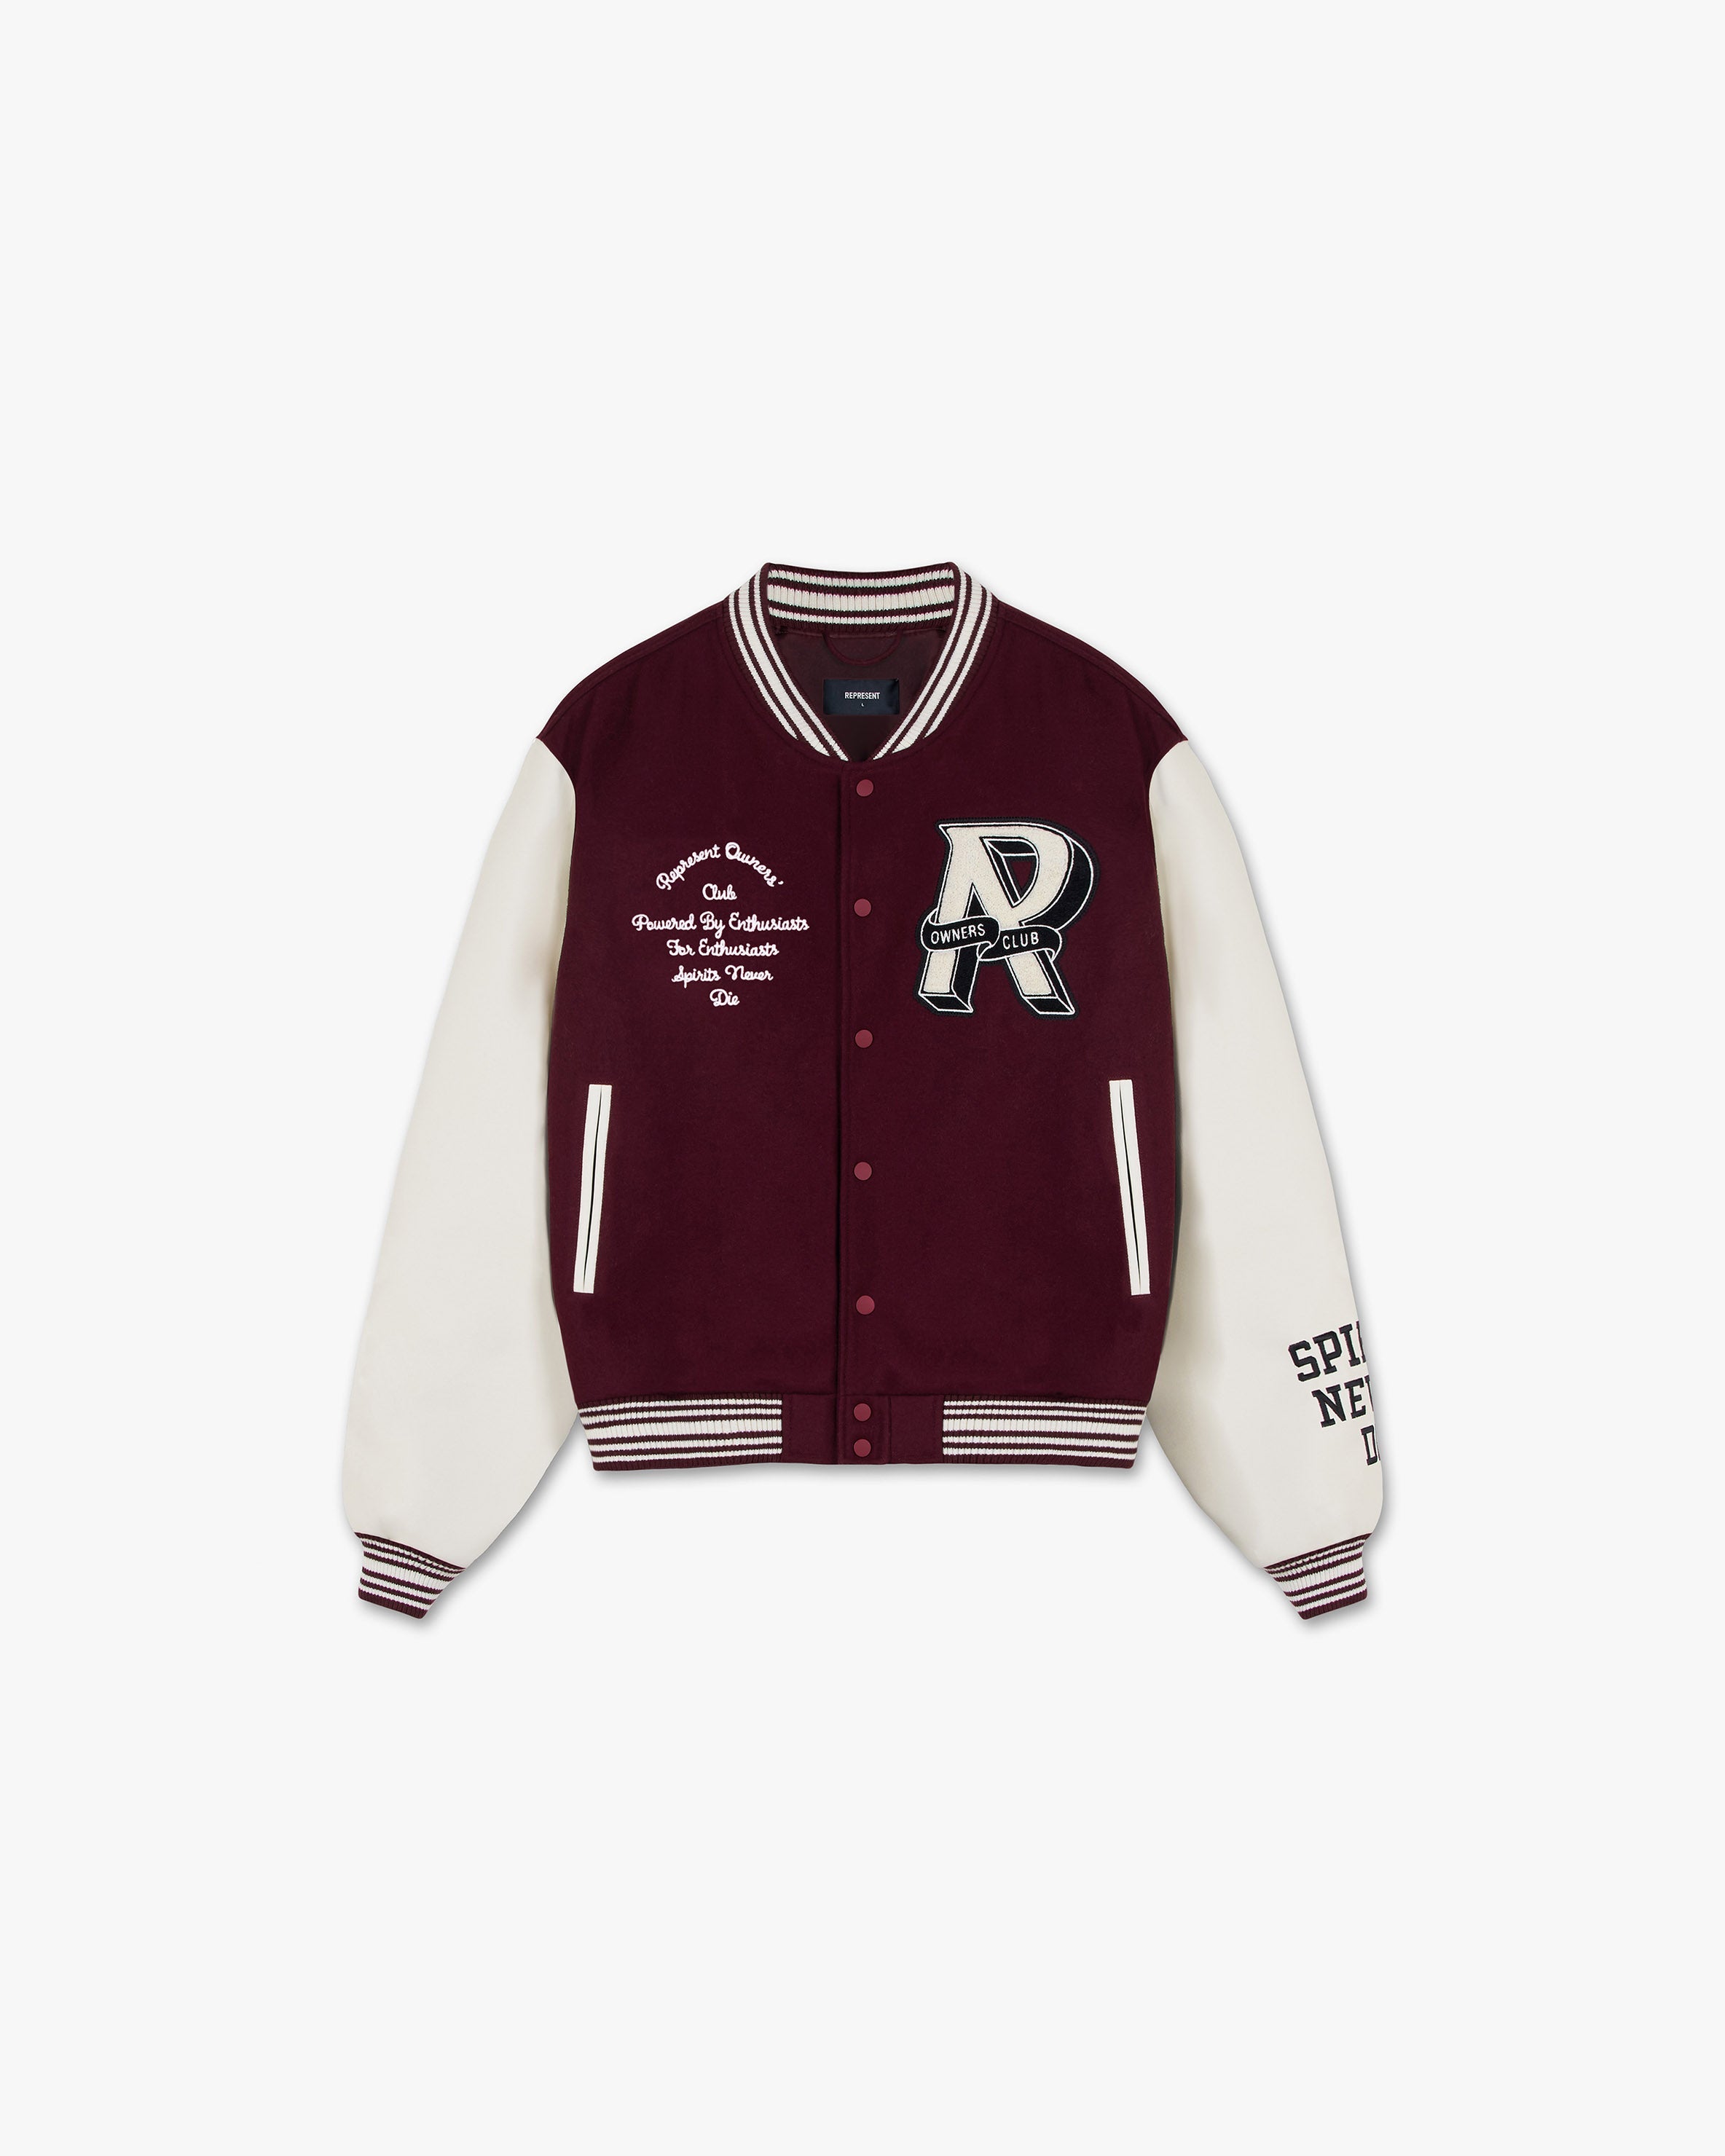 Represent Owners Club Varsity Jacket - Maroon | Represent Clo | Size - XL | Hand Made Italian Wool | Classic Style